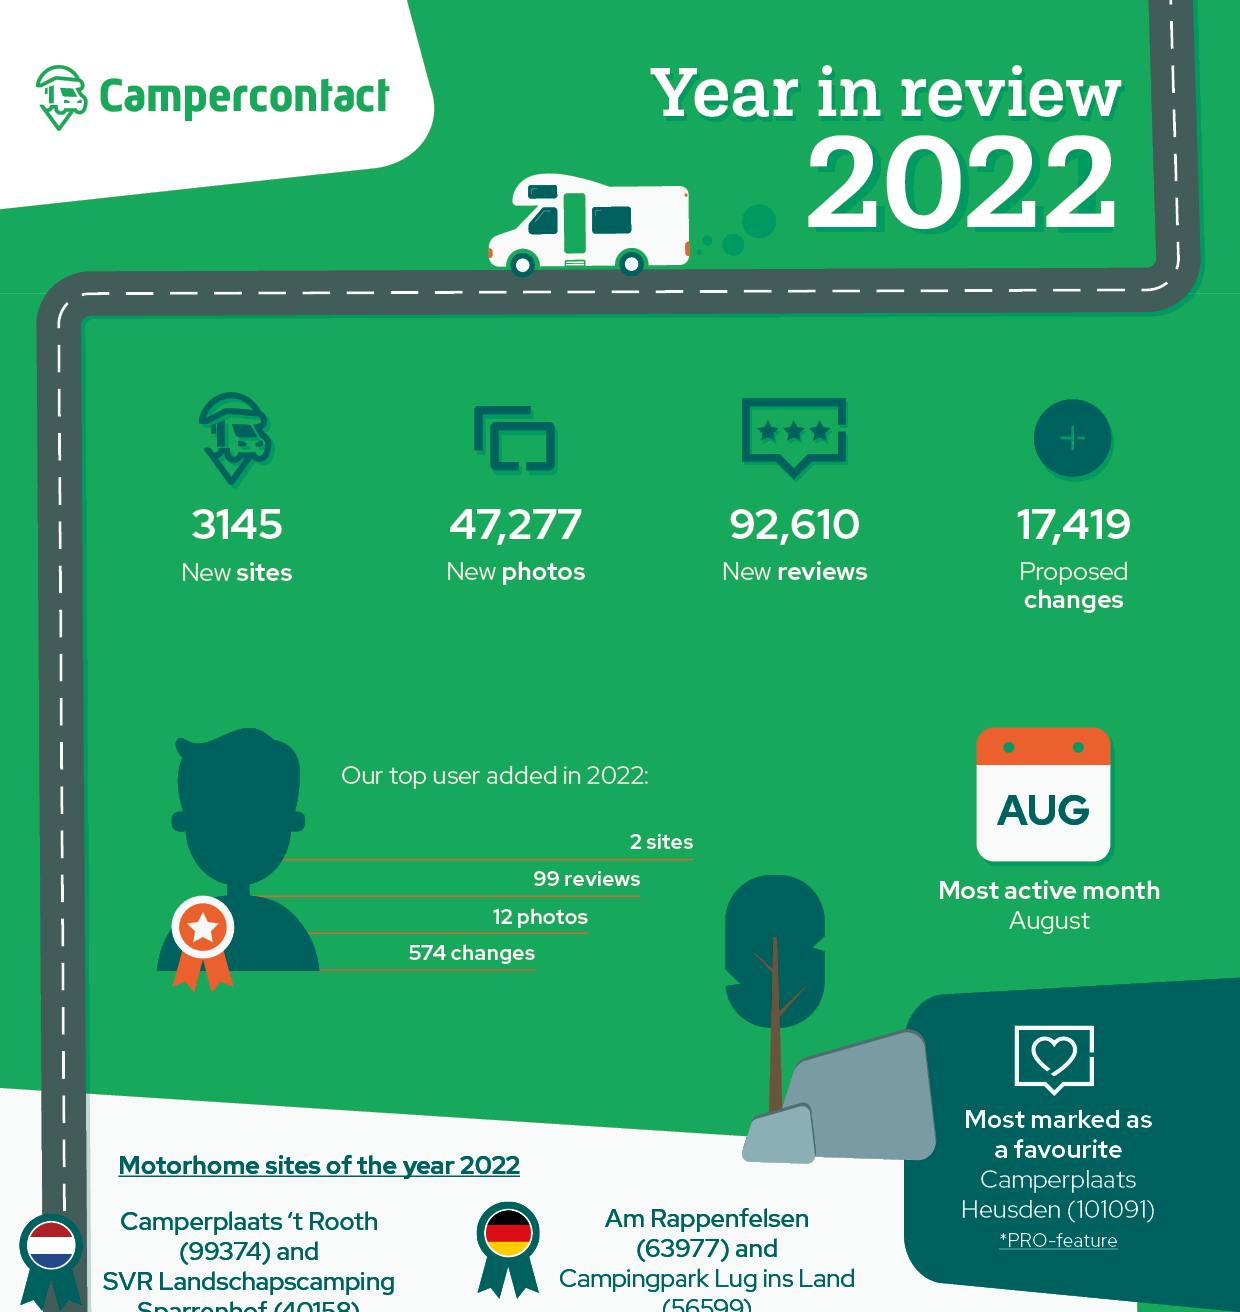 Preview Campercontact annual review 2022 - infographic